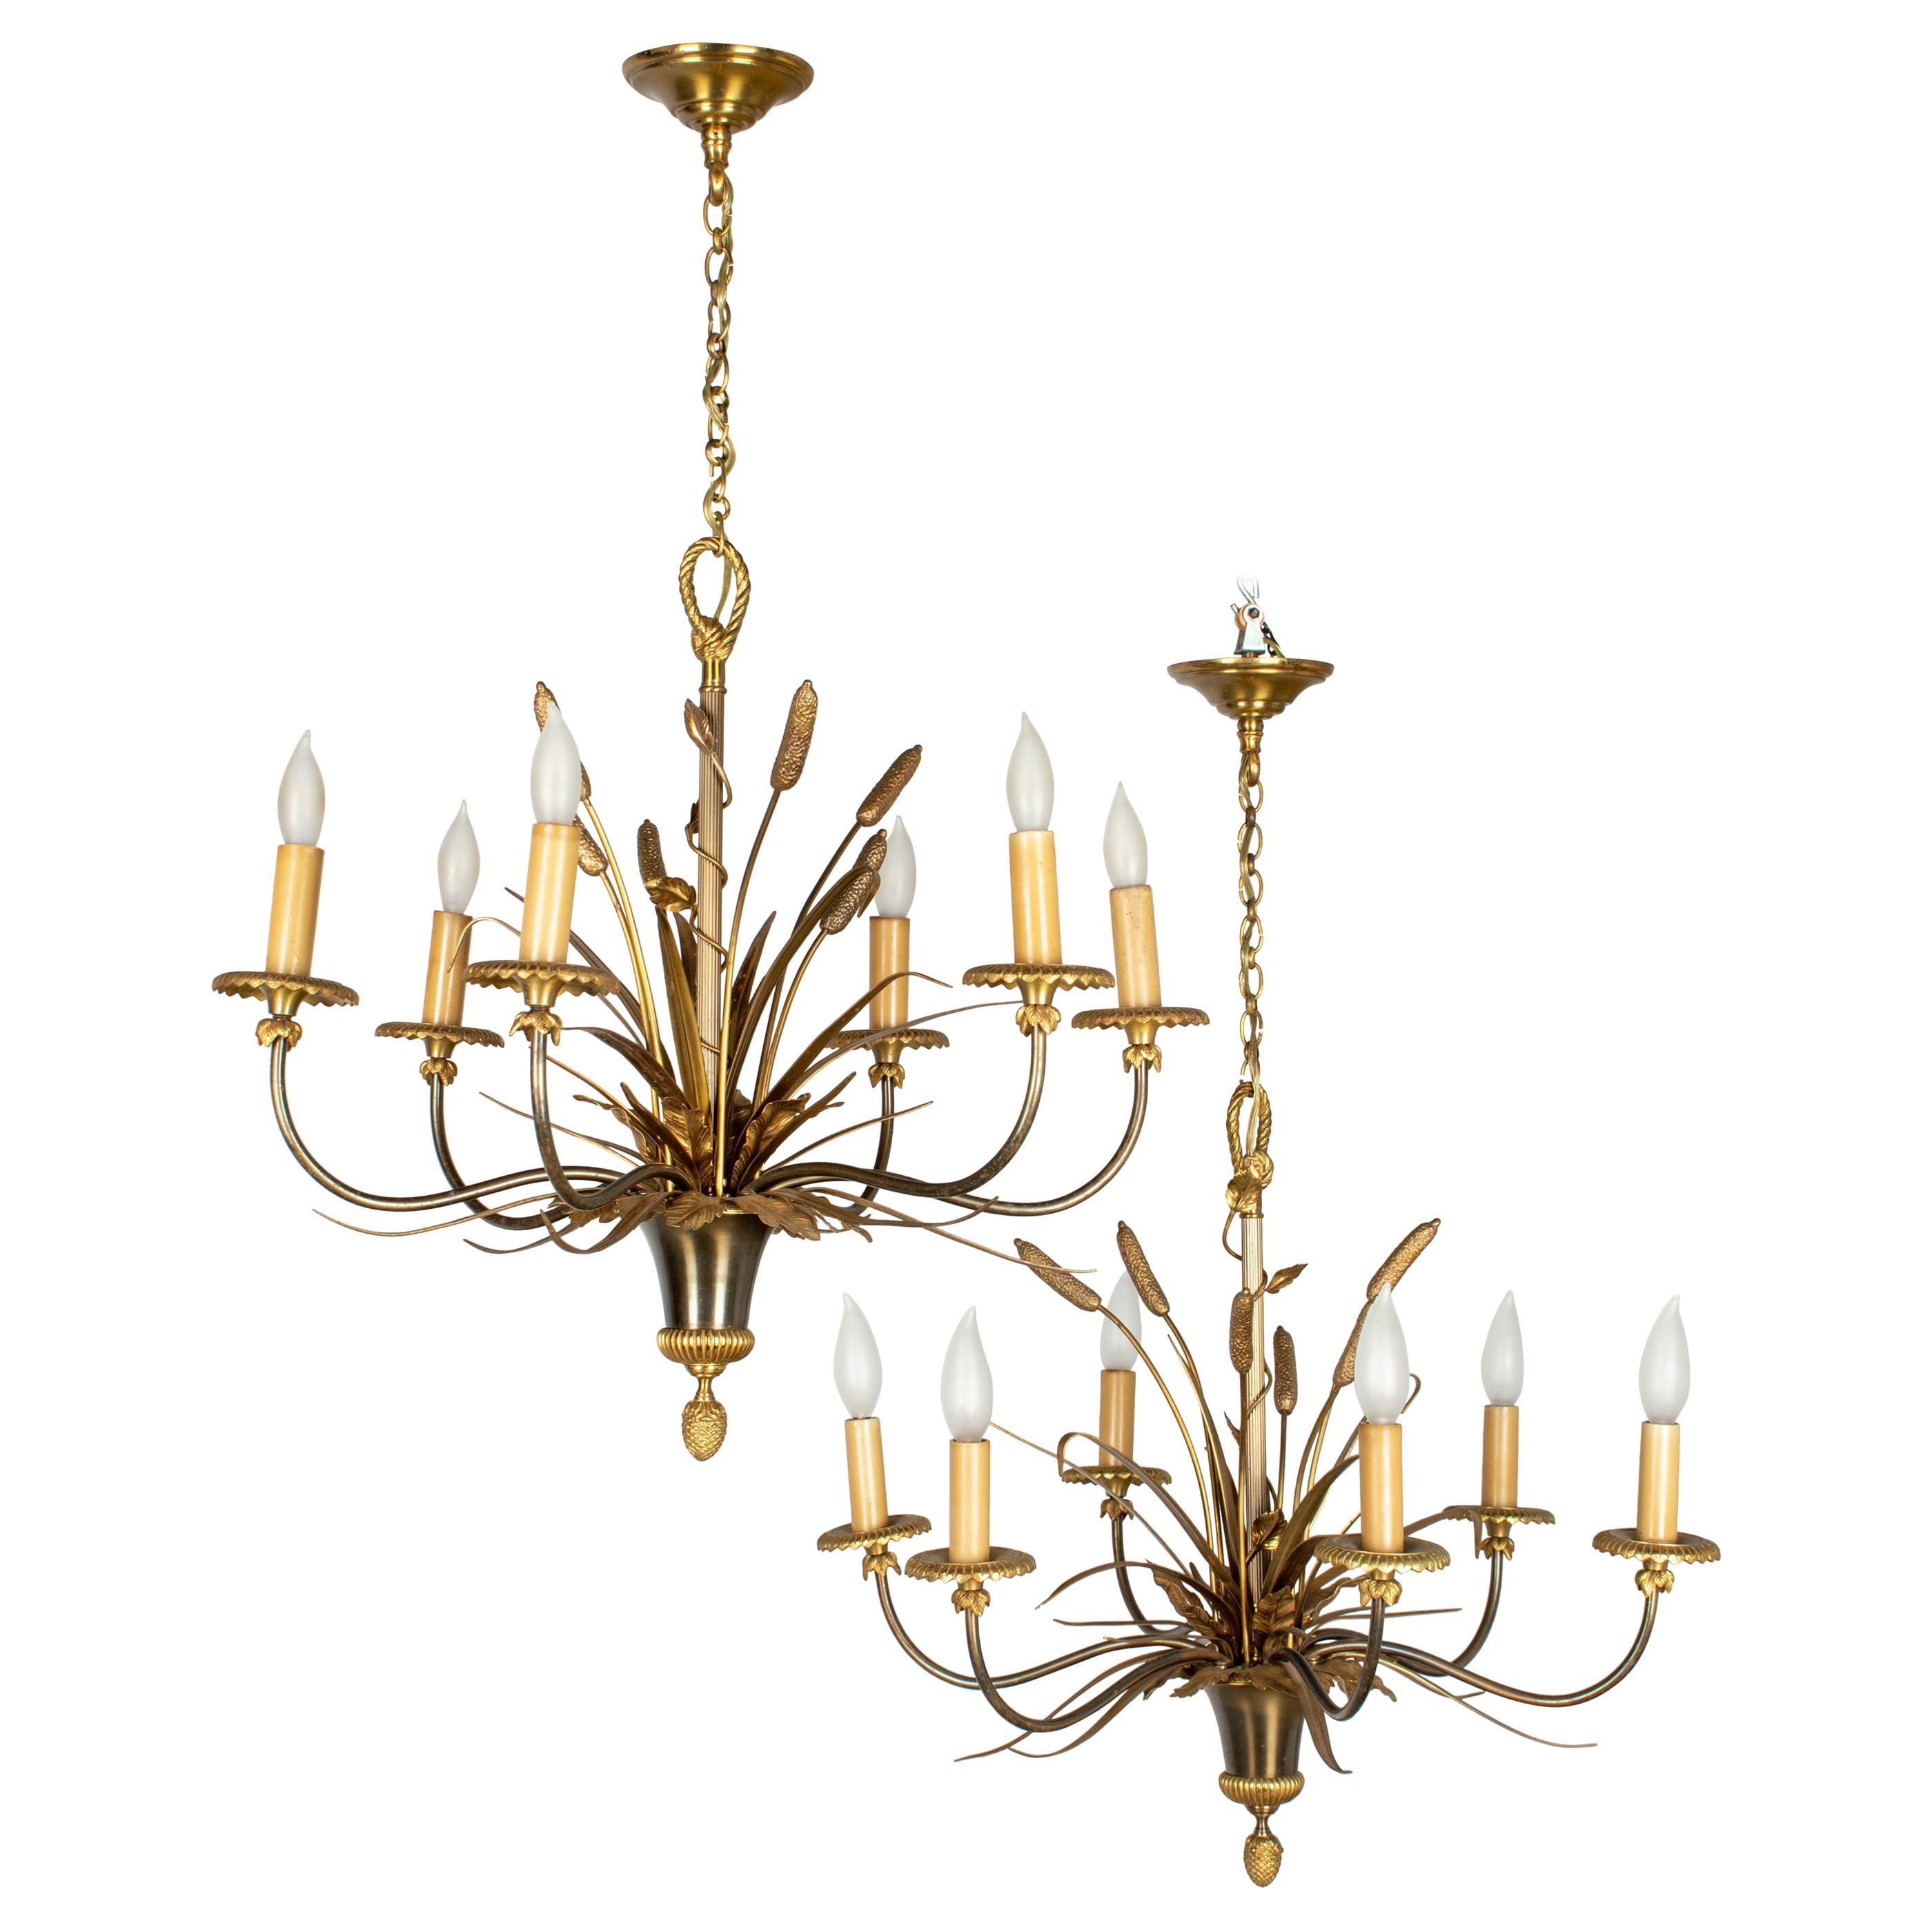 Pair of Maison Charles Bronze Chandeliers